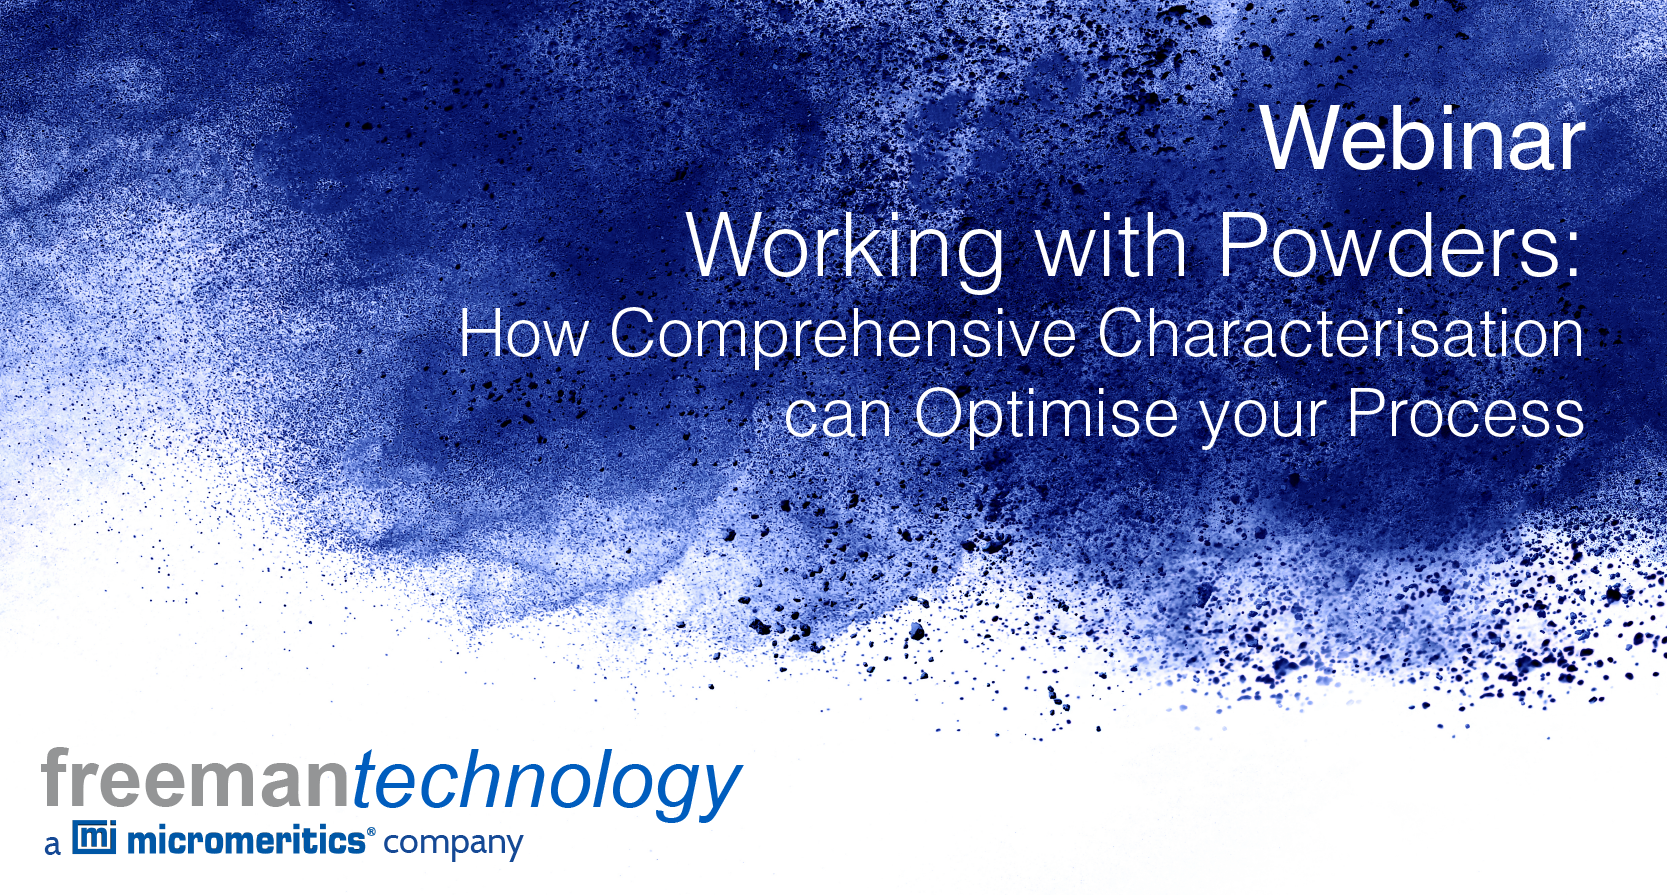 Webinar - working with powders: how comprehensive characterisation can optimise your process